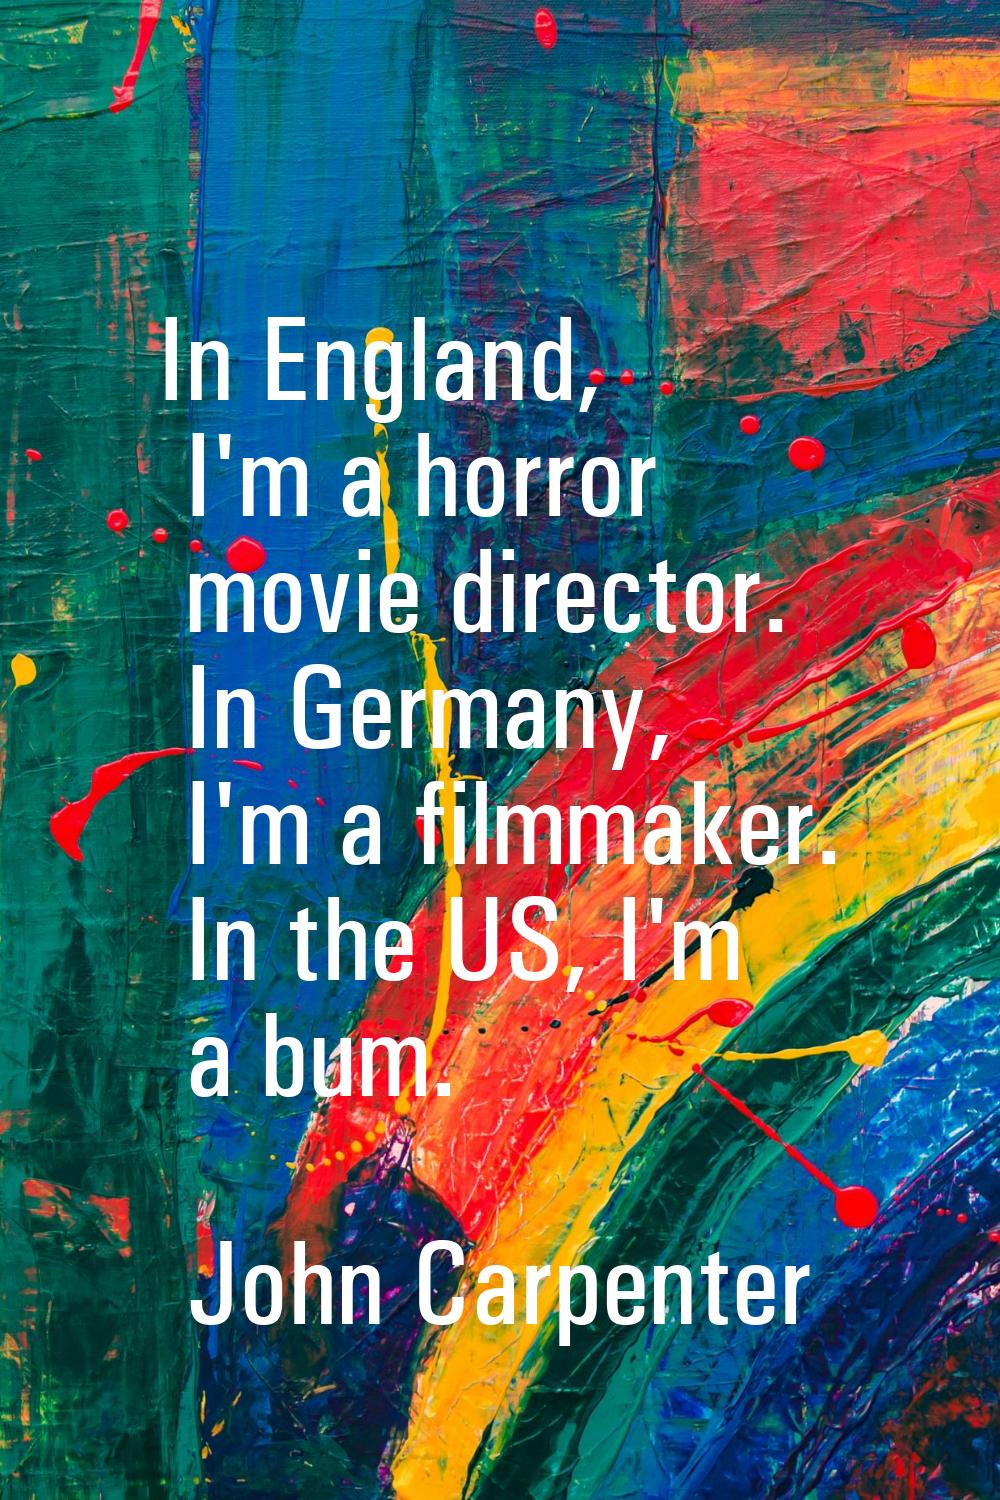 In England, I'm a horror movie director. In Germany, I'm a filmmaker. In the US, I'm a bum.